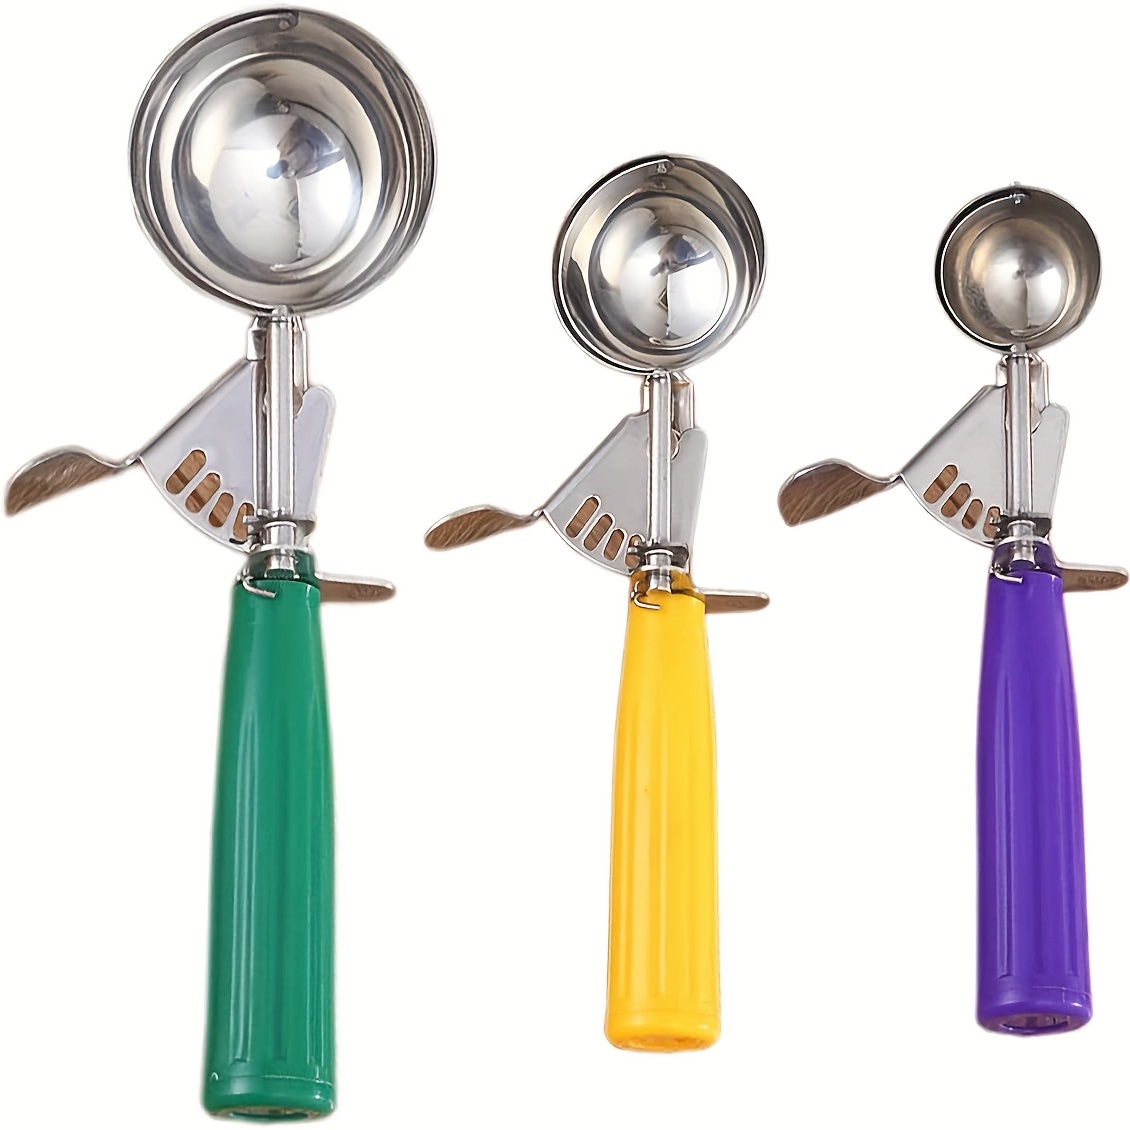 Ice Cream Scoops, Ice Cream Scoop With Trigger, Multiple Size Large/medium/ small Cookie Dough Scoop For Baking, Cookie Scoops For Baking, Melon Spoon, Ice  Cream Digger Spoon, Dessert Spoon For Party Wedding, Kitchen